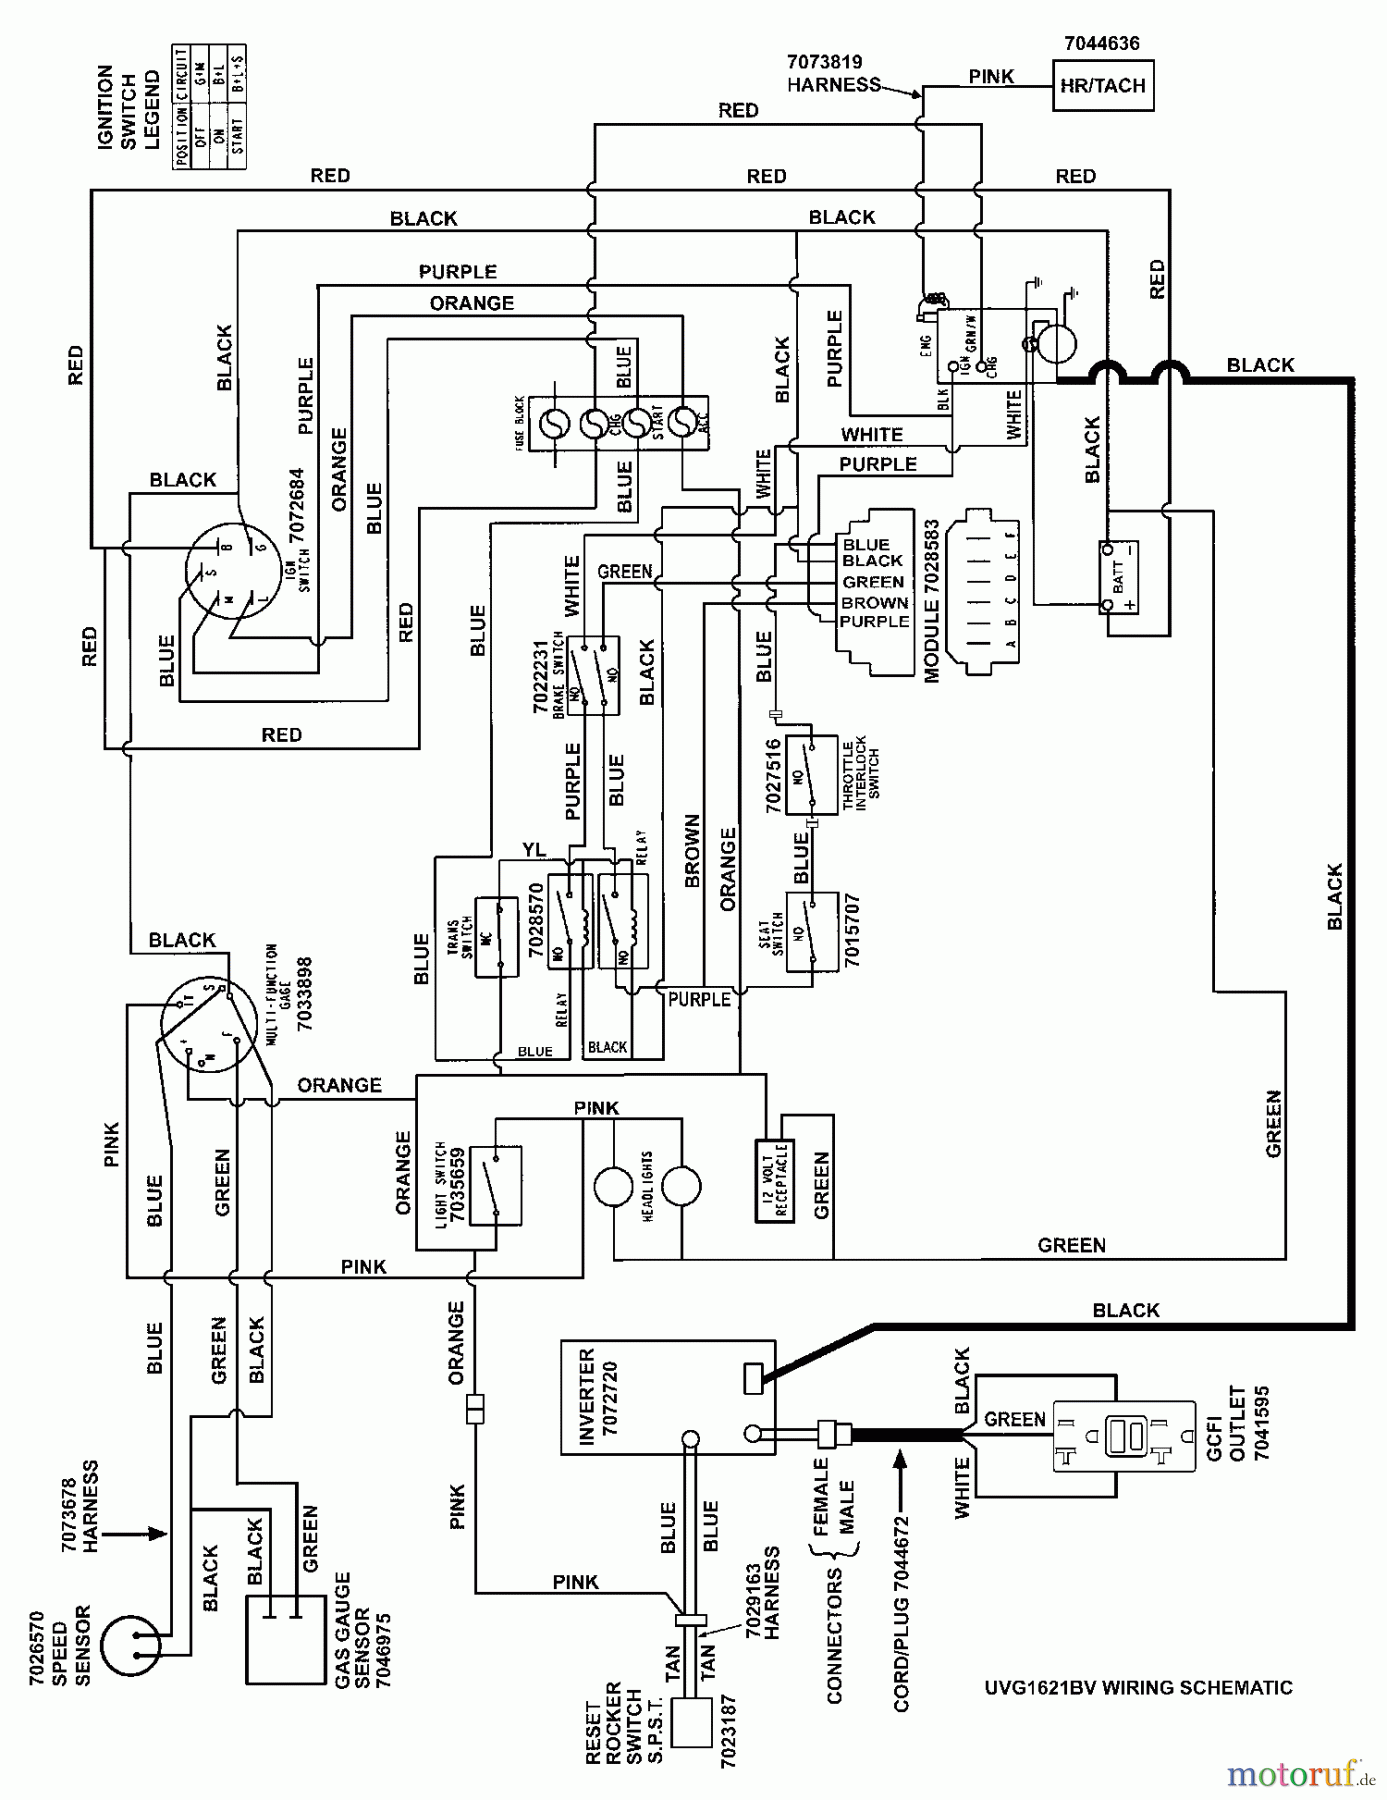  Snapper Utility Vehicles UVG1621BV (7085632) - Snapper Turf Cruiser Utility Vehicle, 16 HP, Series 1 WIRING SCHEMATIC- UVG Model